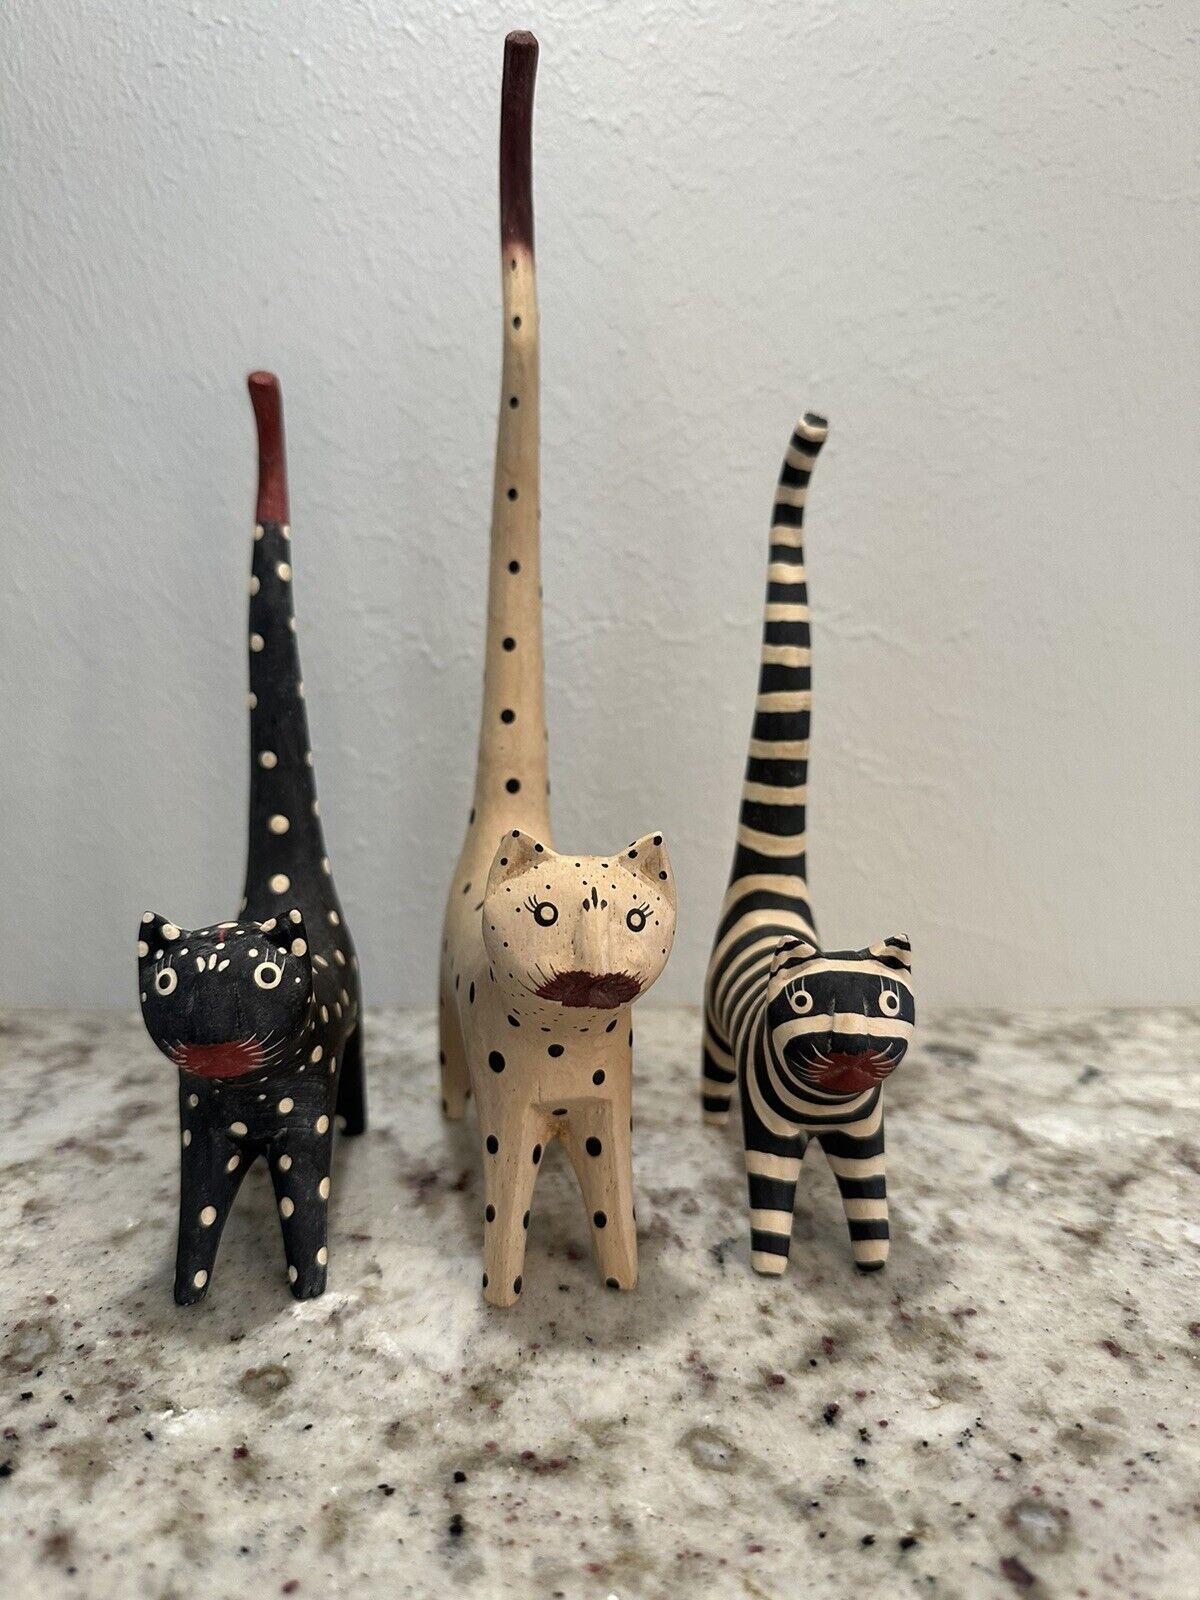 LONG TAIL WOODEN “MOMMY AND HER 2 KITTENS” HAND PAINTED FOLK ART